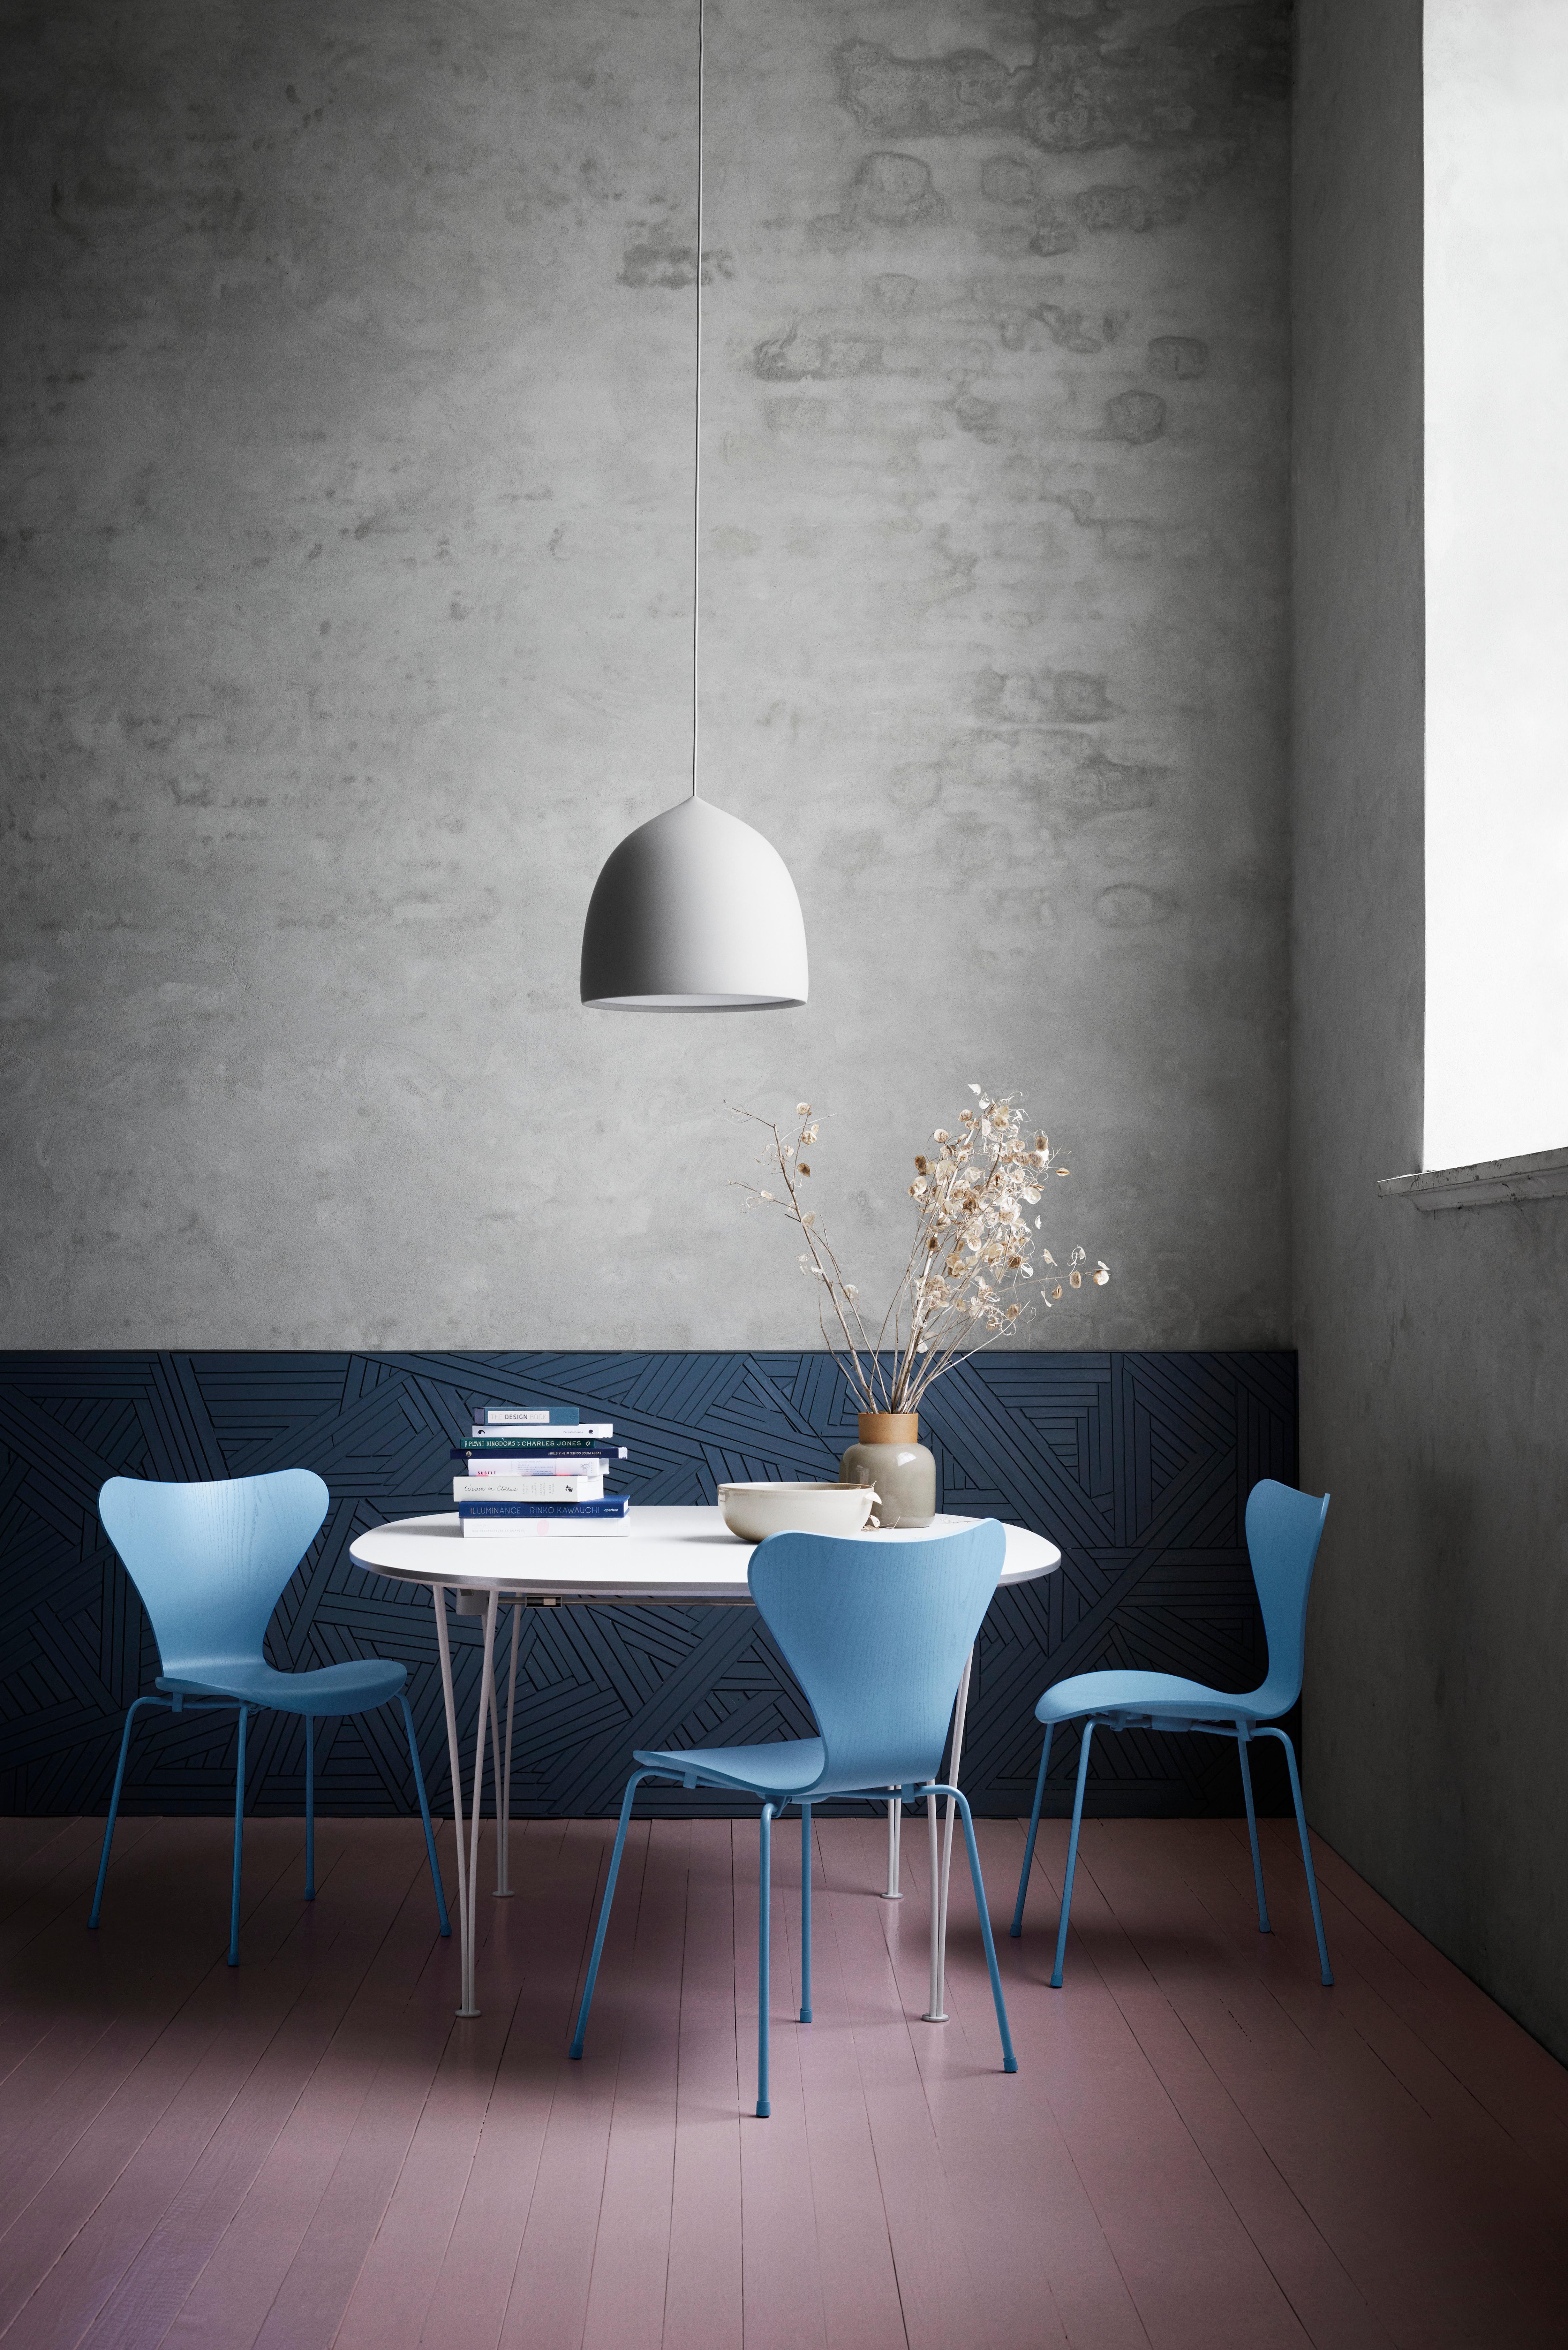 Large GamFratesi 'Suspence P2' Pendant Lamp for Fritz Hansen in Light Gray.

Established in 1872, Fritz Hansen has become synonymous with legendary Danish design. Combining timeless craftsmanship with an emphasis on sustainability, the brand’s